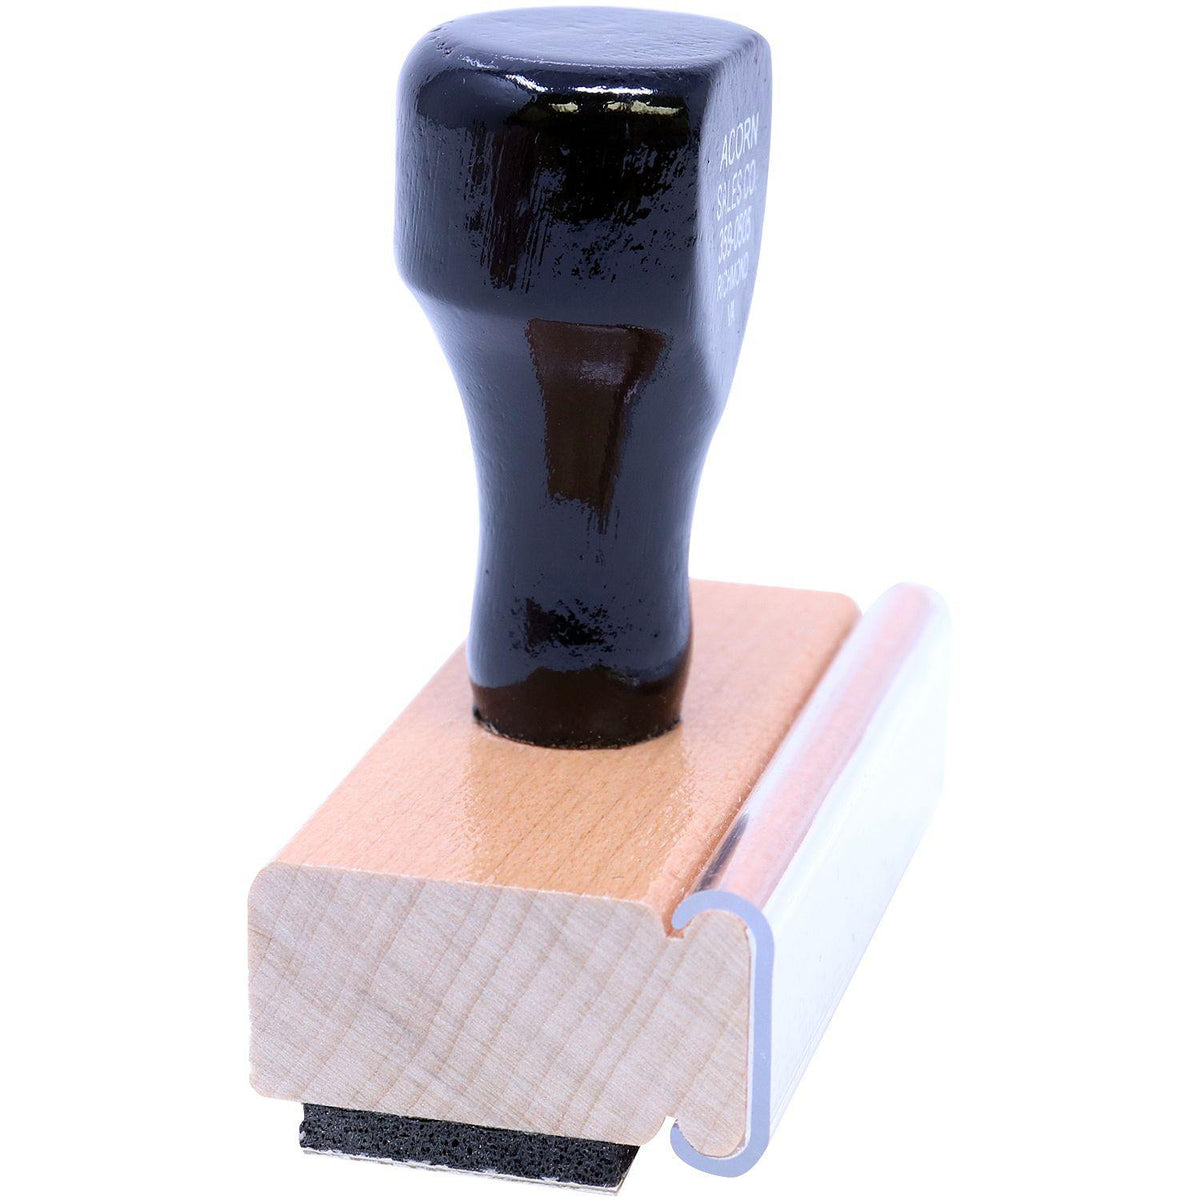 Side View of Large Full Amount Due Rubber Stamp at an Angle